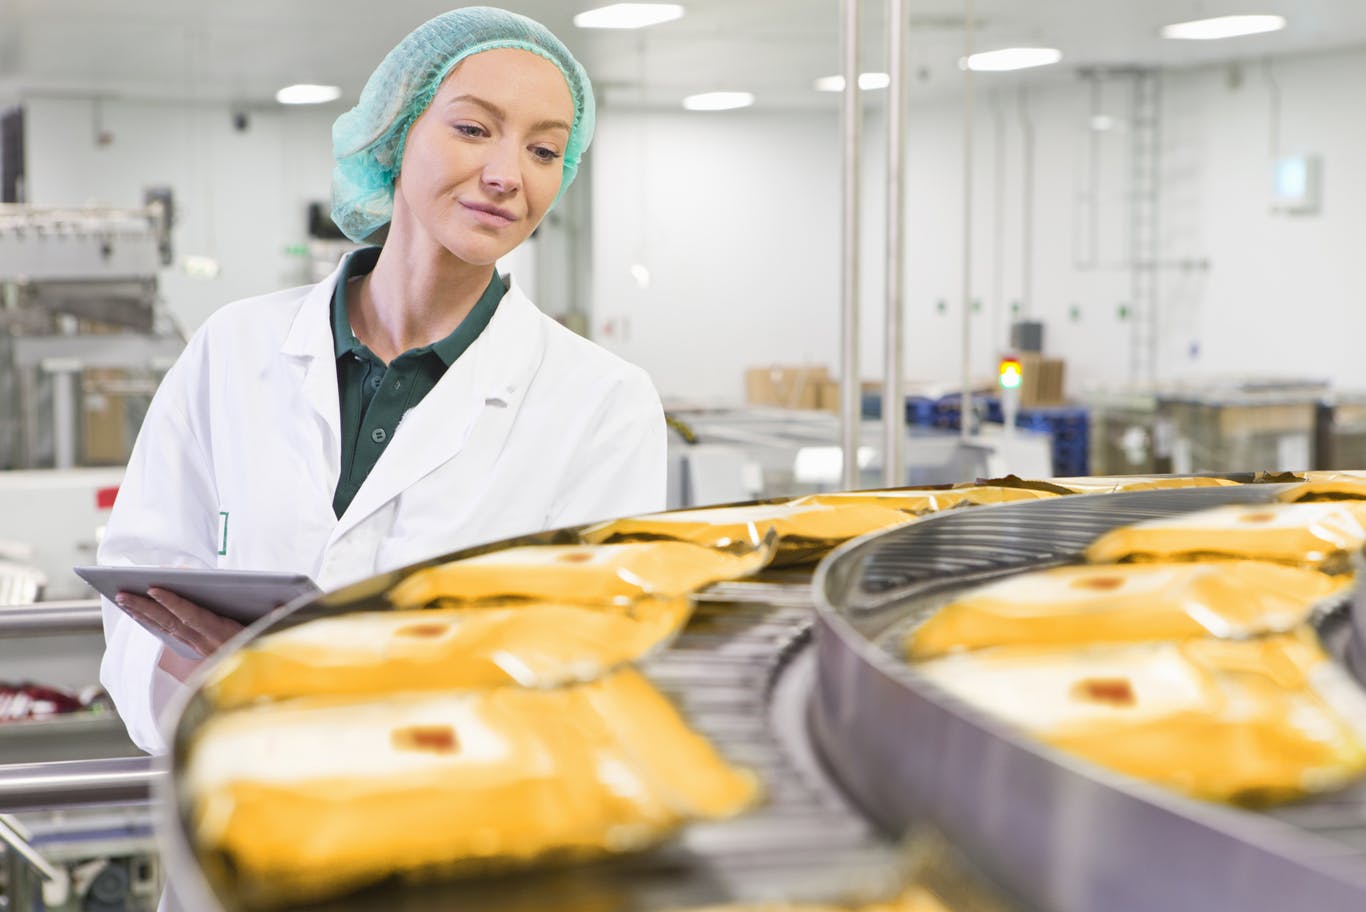 Quality control worker with digital tablet examining cheese at production line in processing plant